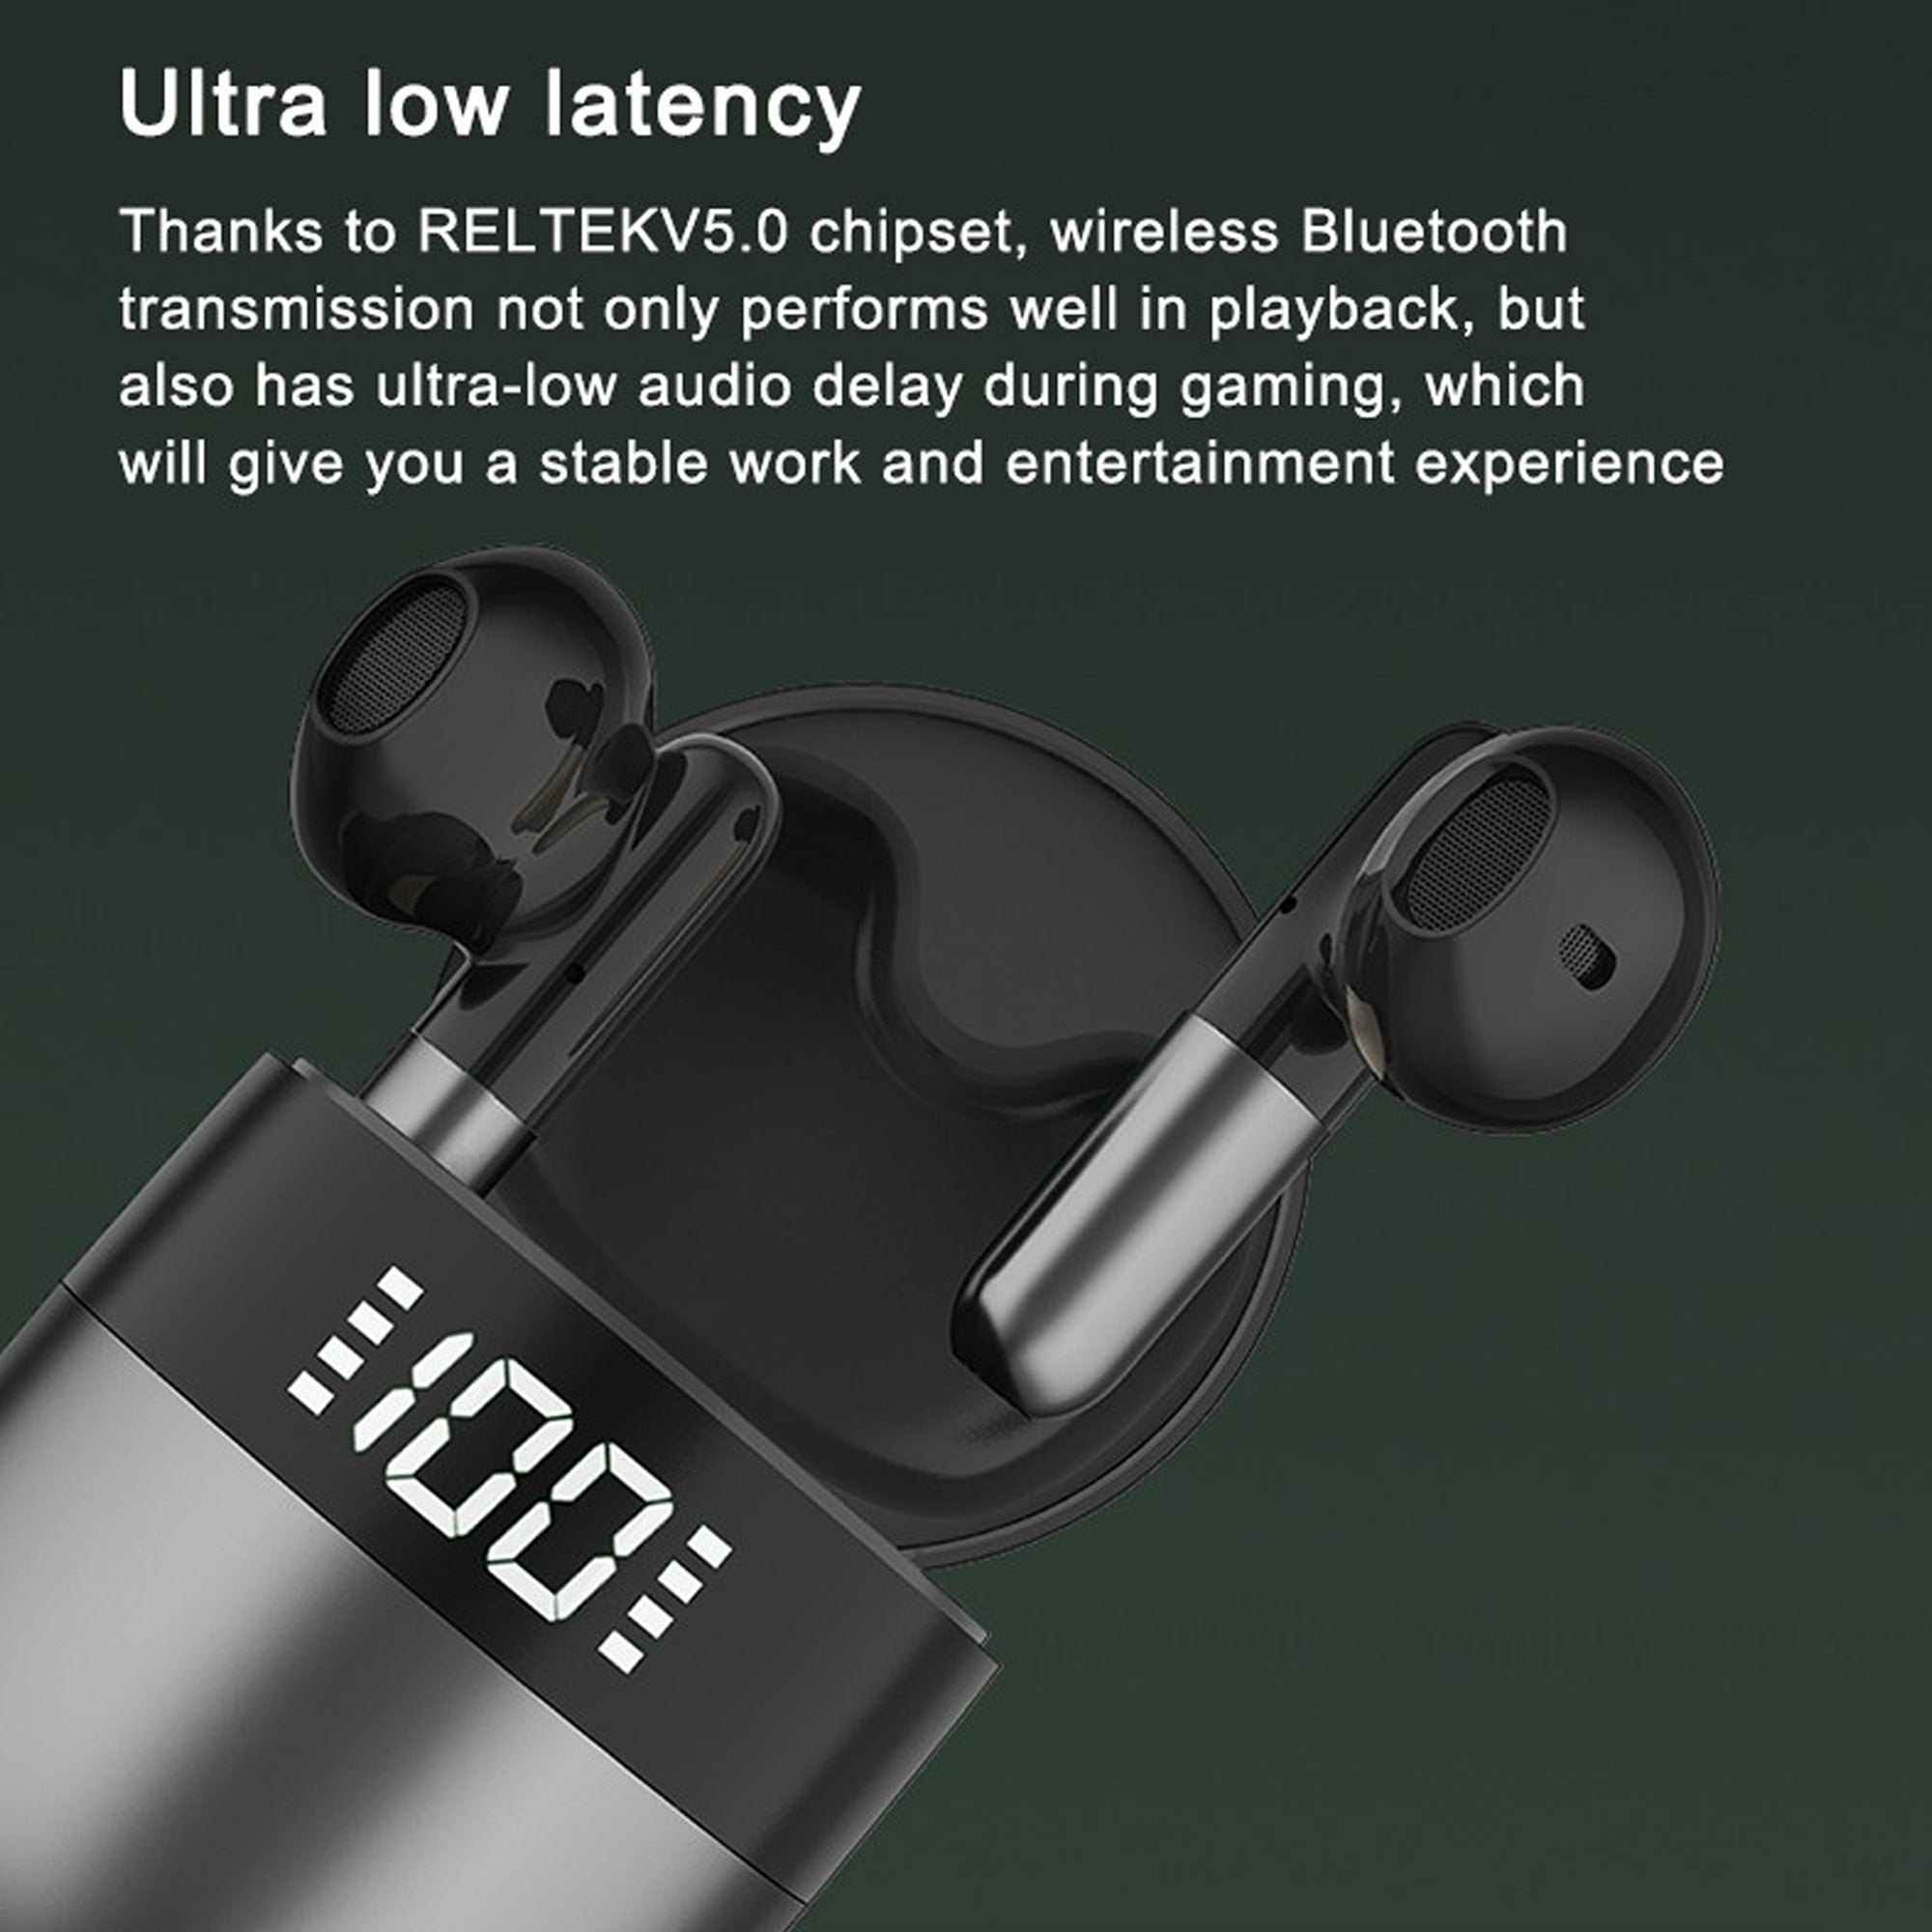 LED Display on an earbuds case